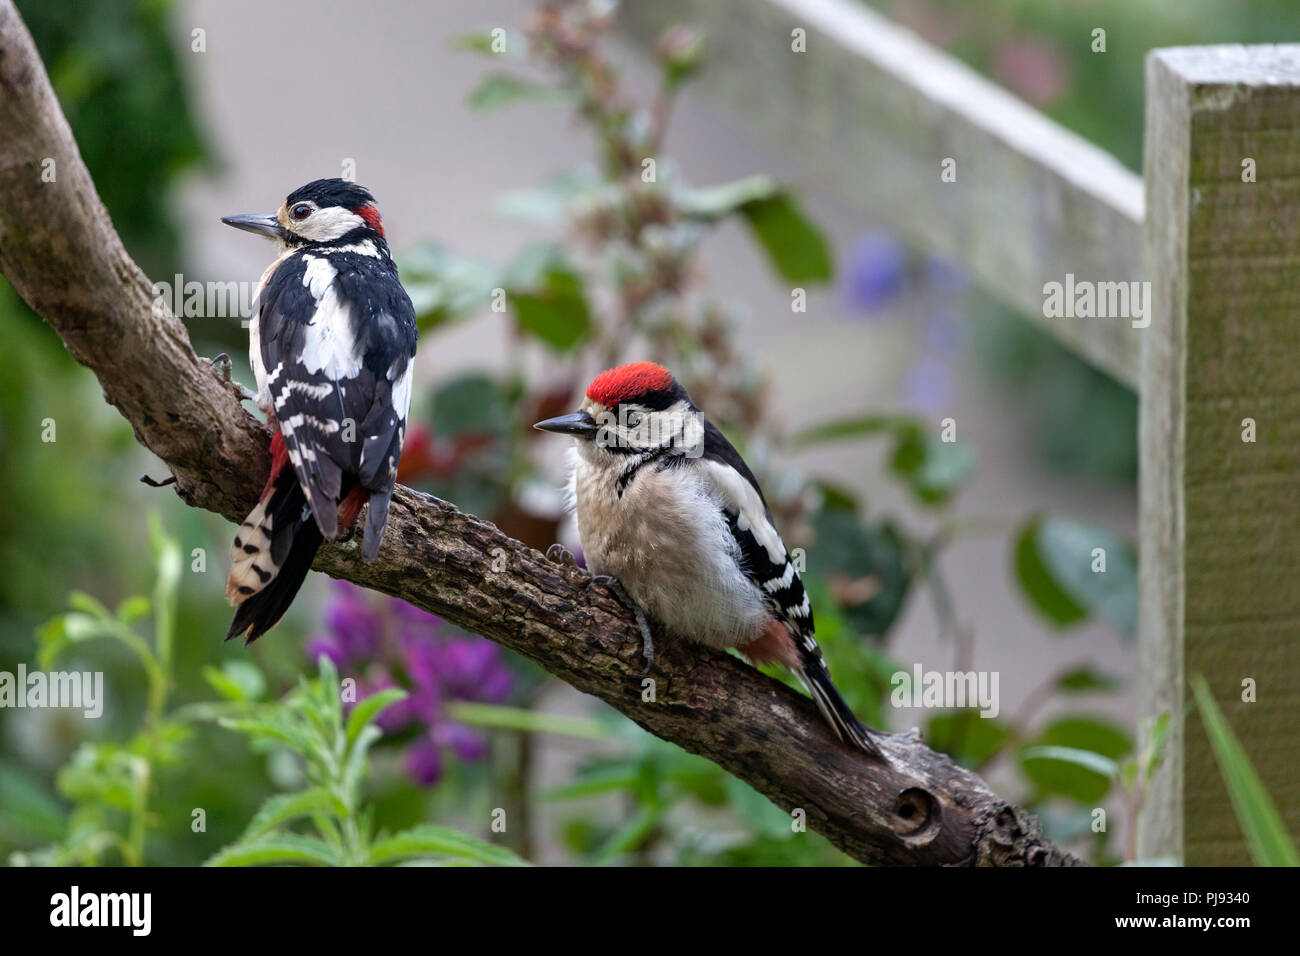 Male Great Spotted Woodpecker (Dendrocopus major) with Young in a Garden Environment, UK. Stock Photo